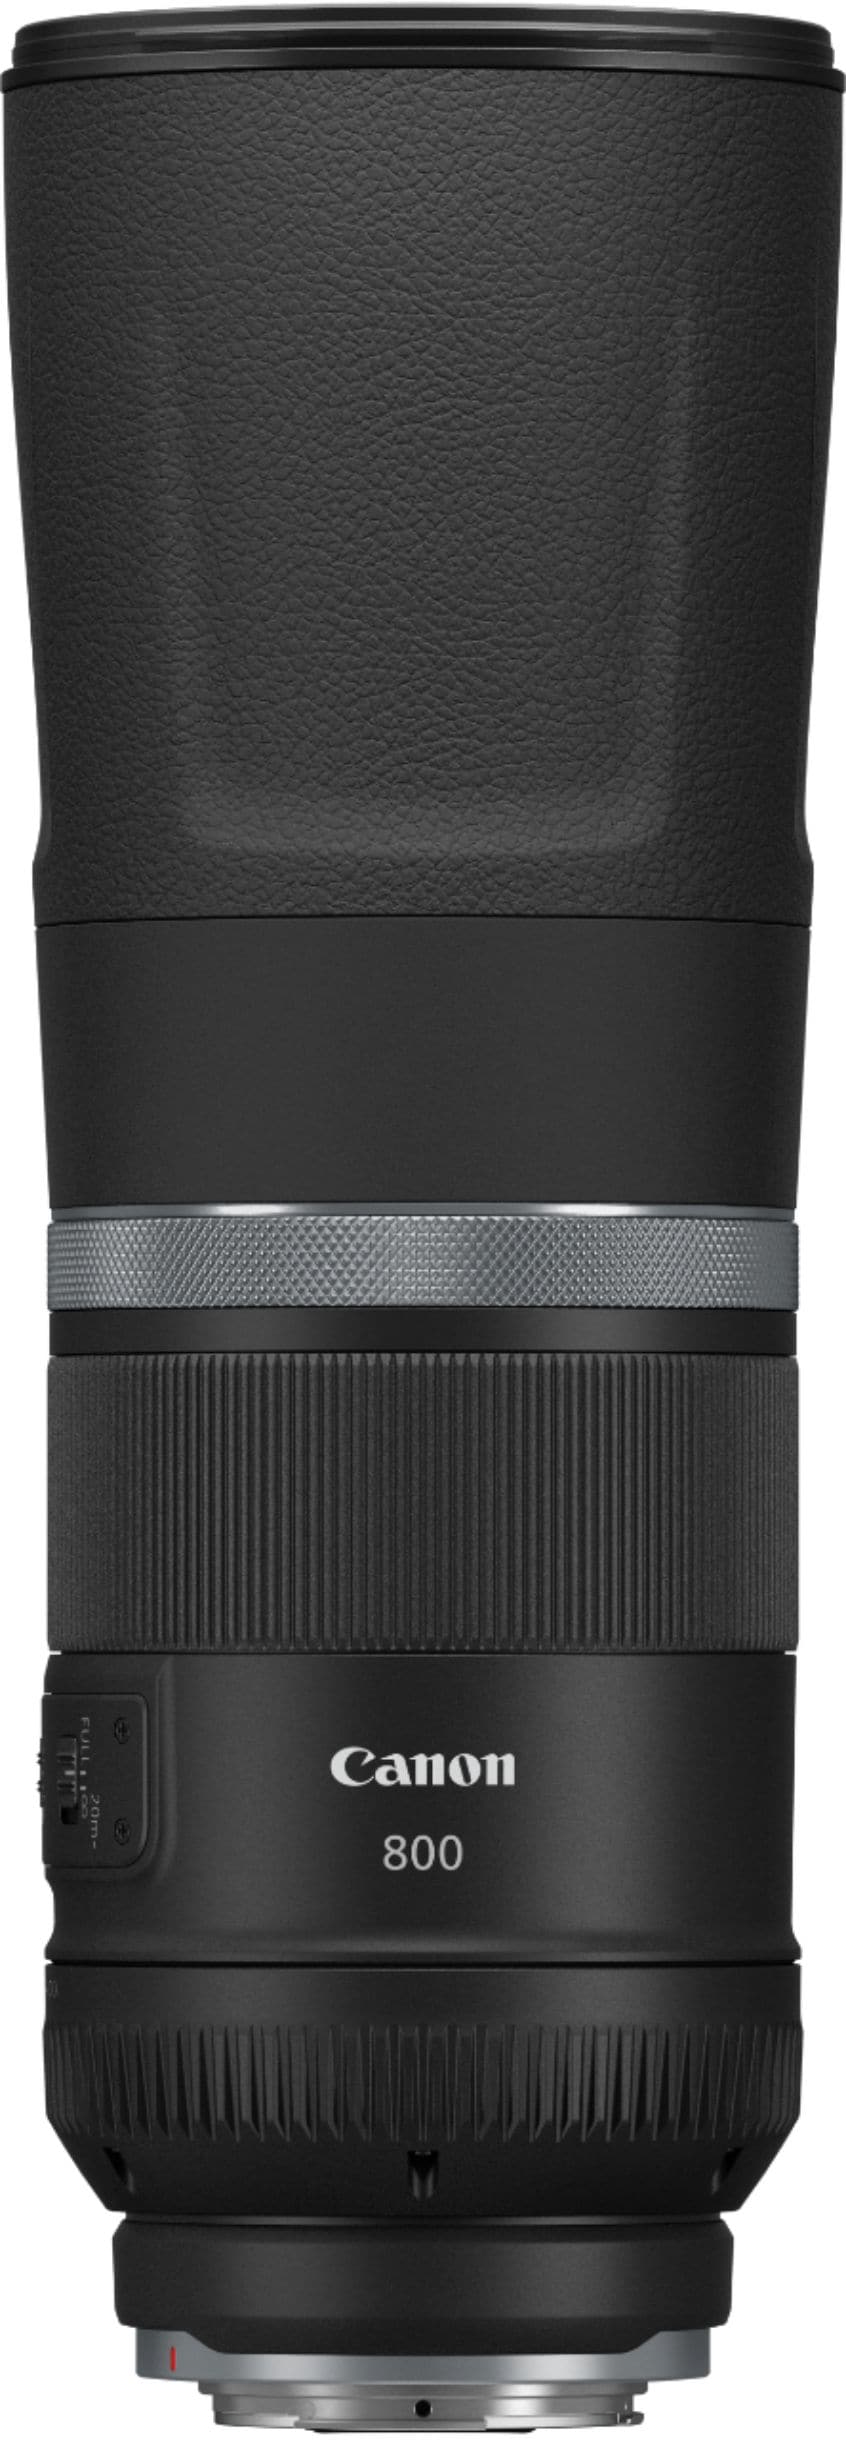 Canon - RF 800mm f/11  IS STM Telephoto Lens for EOS R Cameras - Black_2